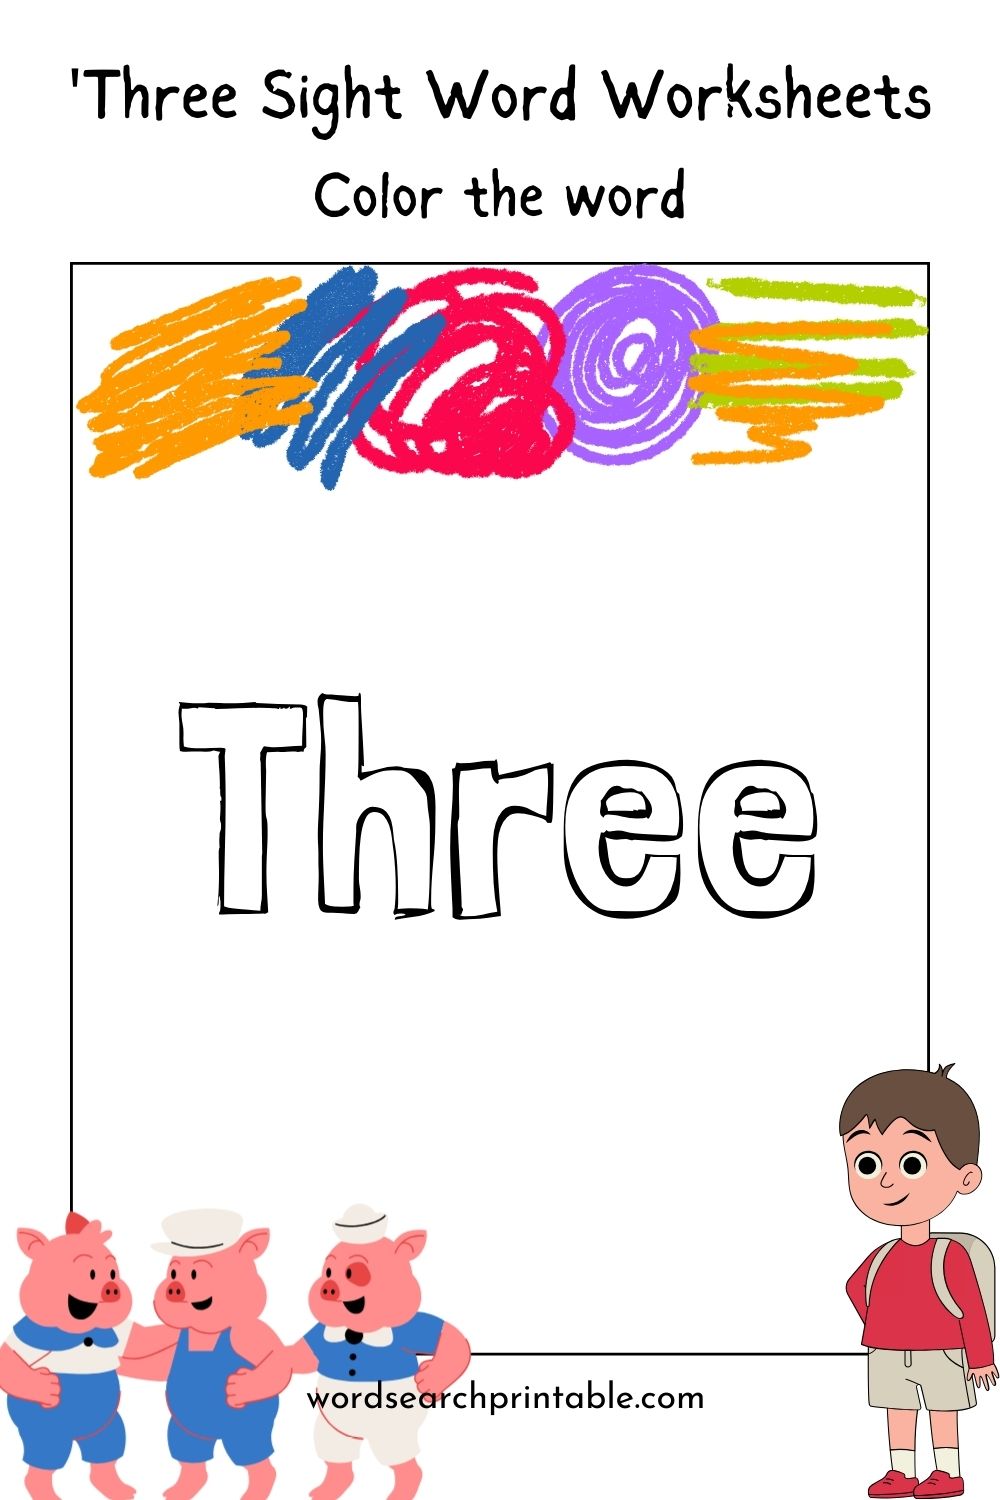 Color the sight word Three